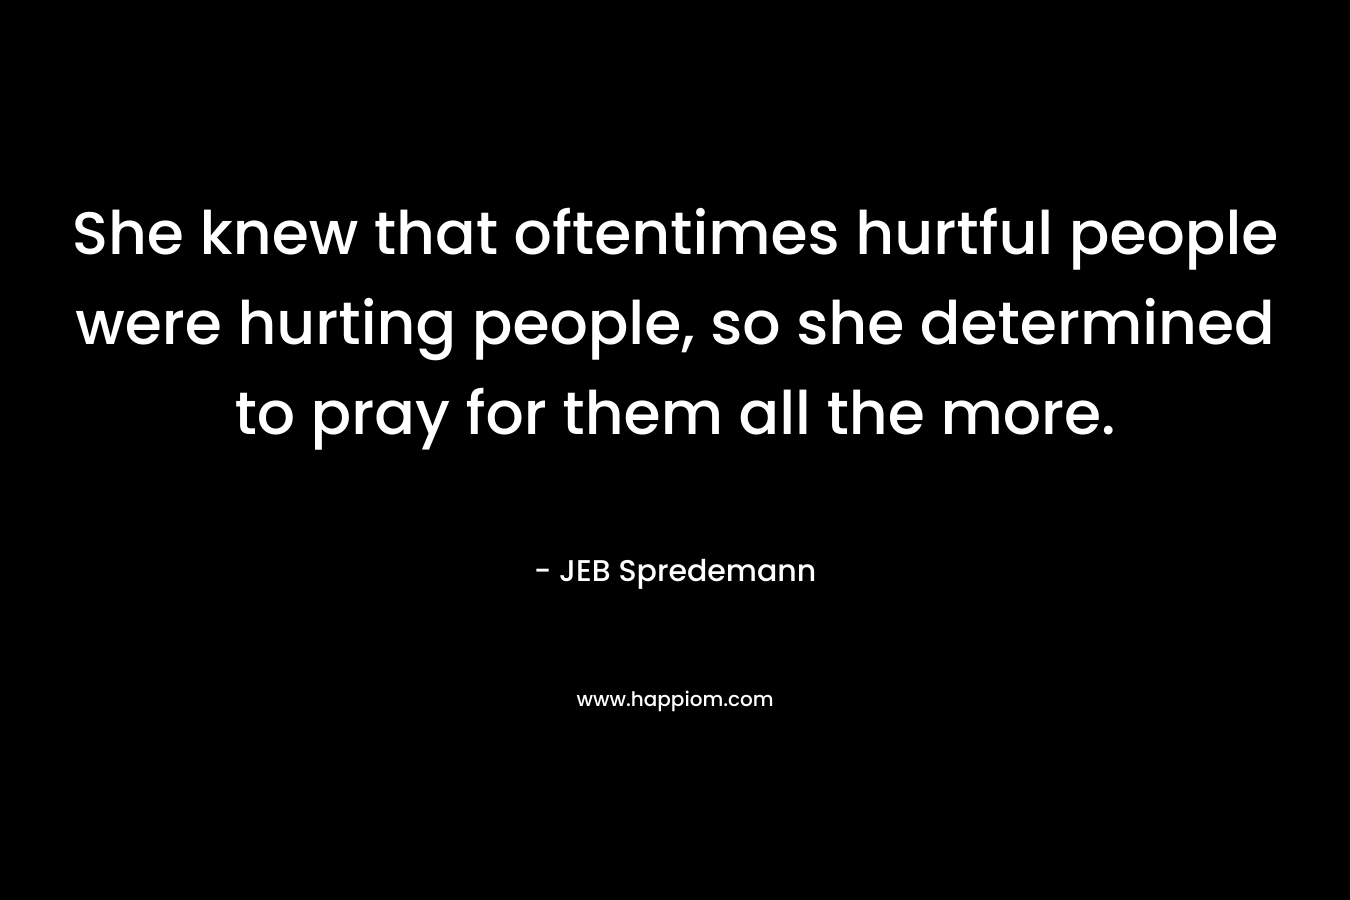 She knew that oftentimes hurtful people were hurting people, so she determined to pray for them all the more.